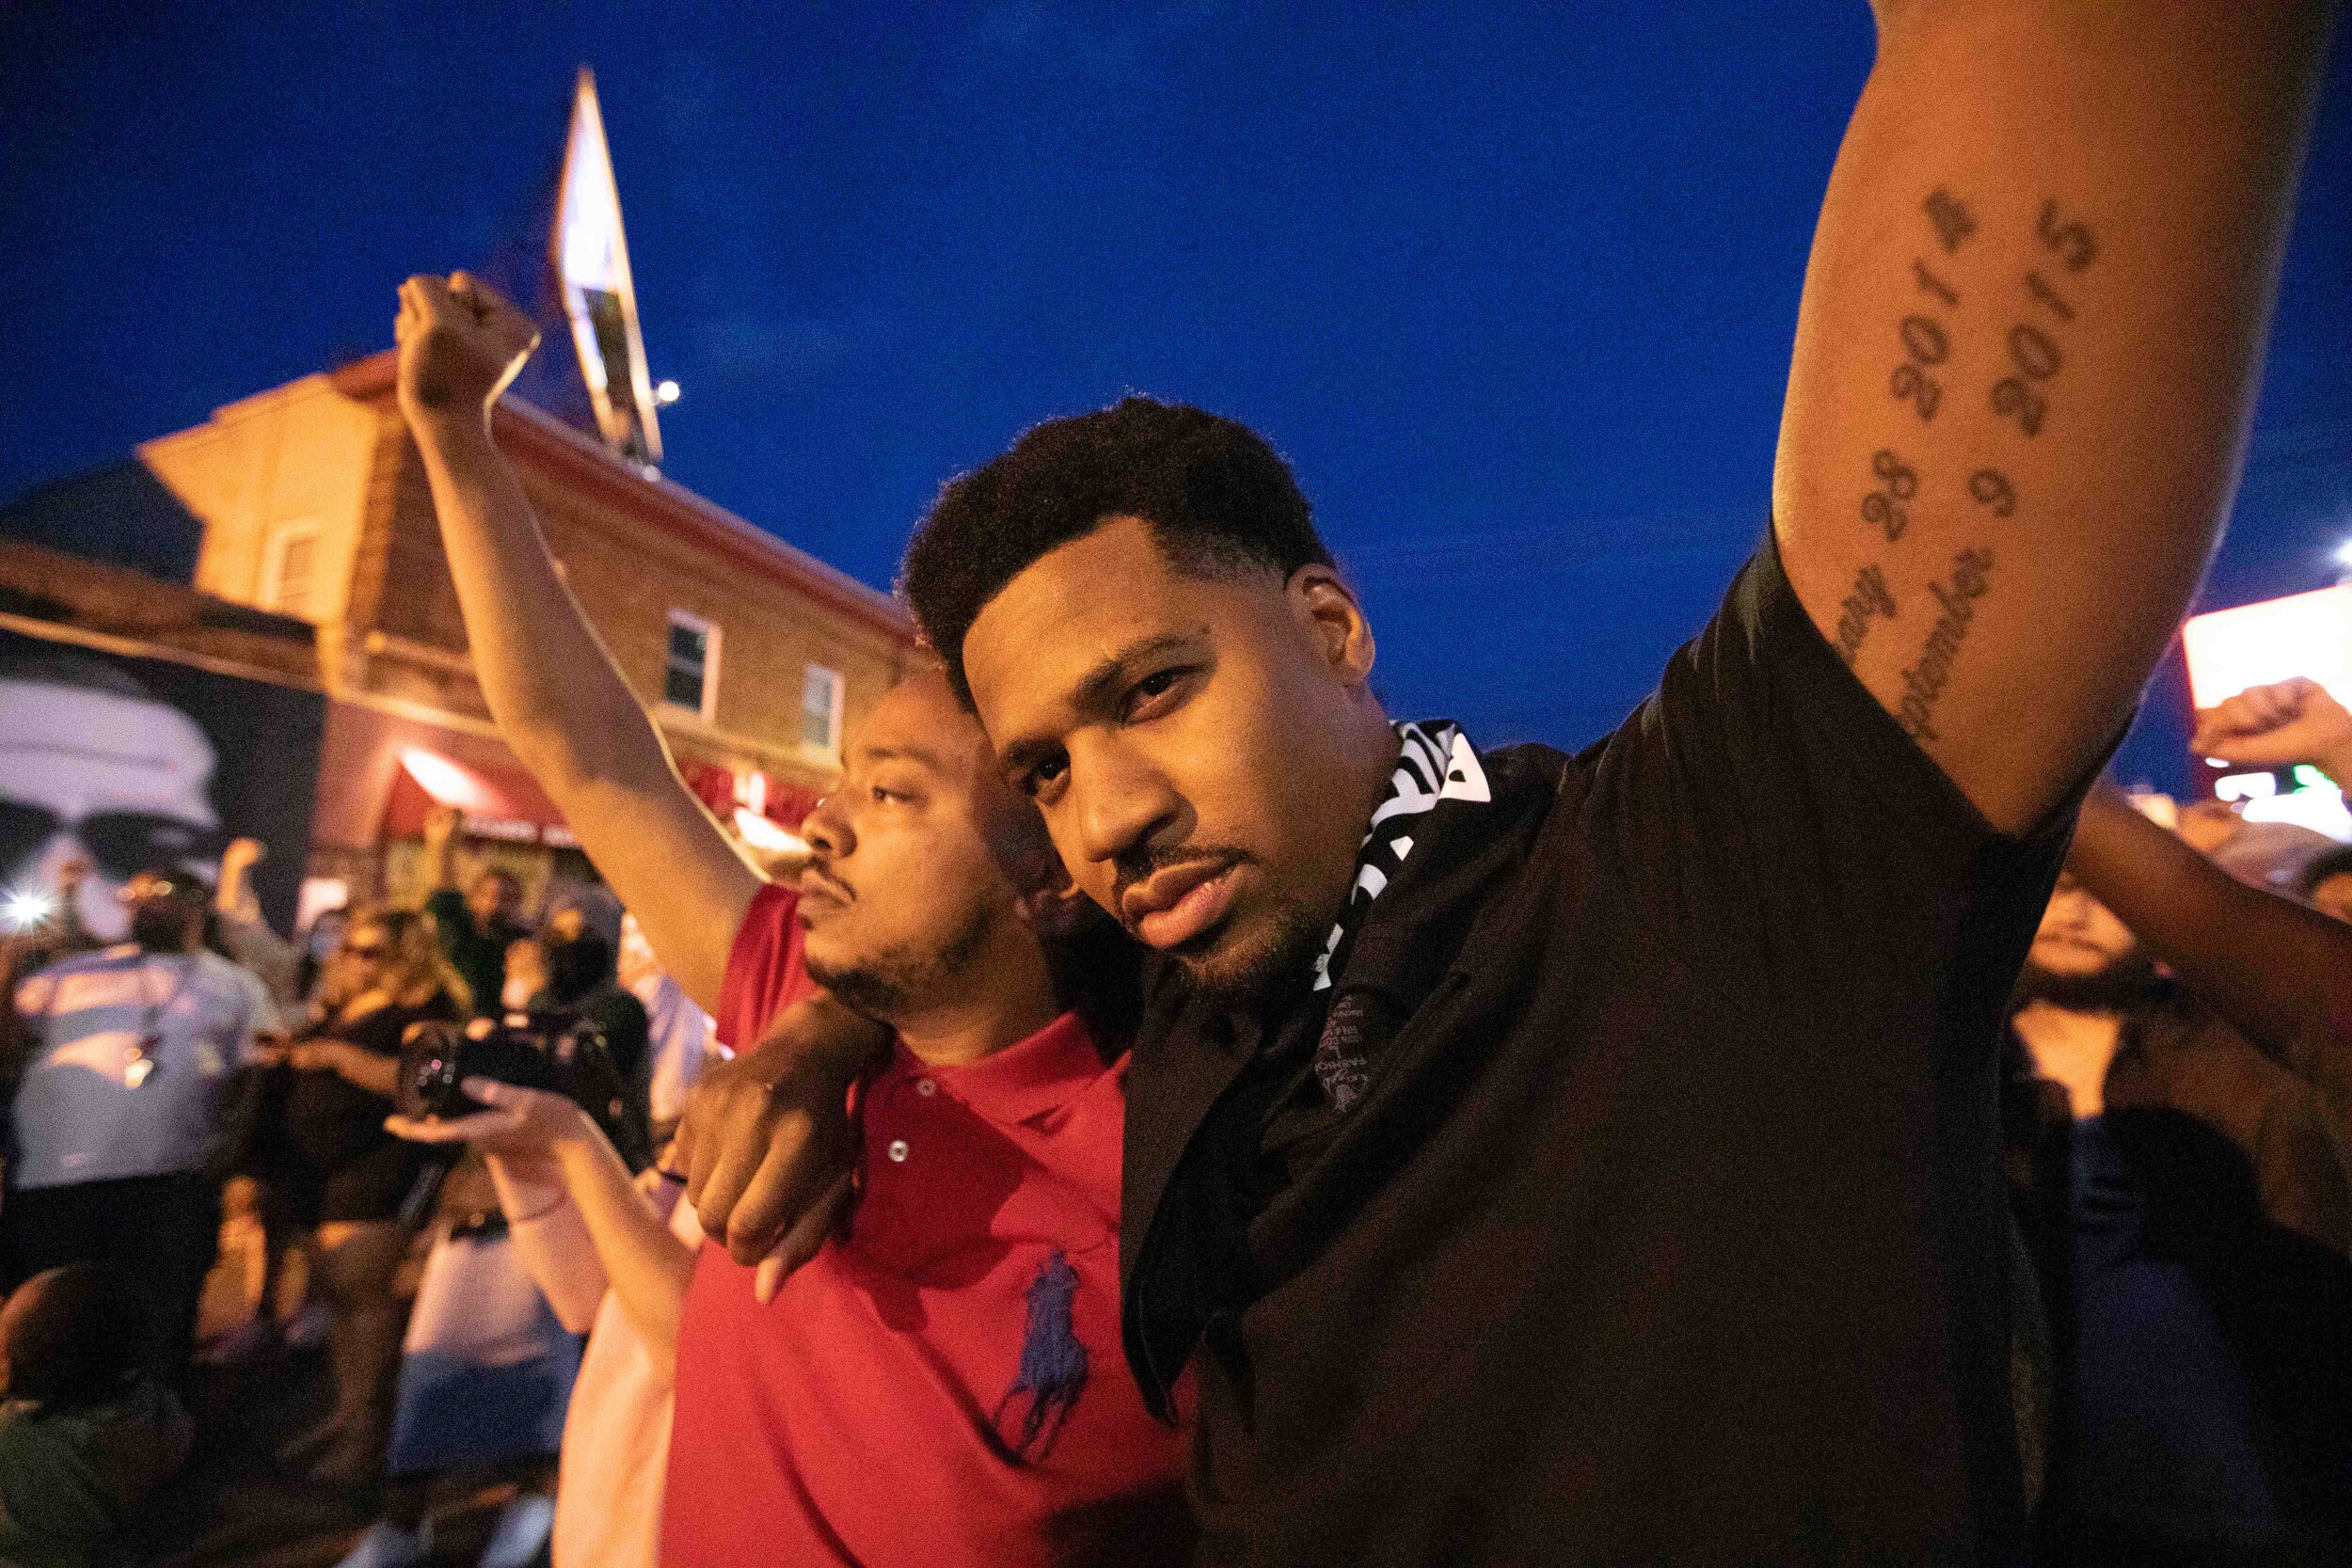  Community members raise their fists in the air while mourning the loss of George Floyd at the site of his memorial in Minneapolis, Minnesota on Jun 14, 2020. 